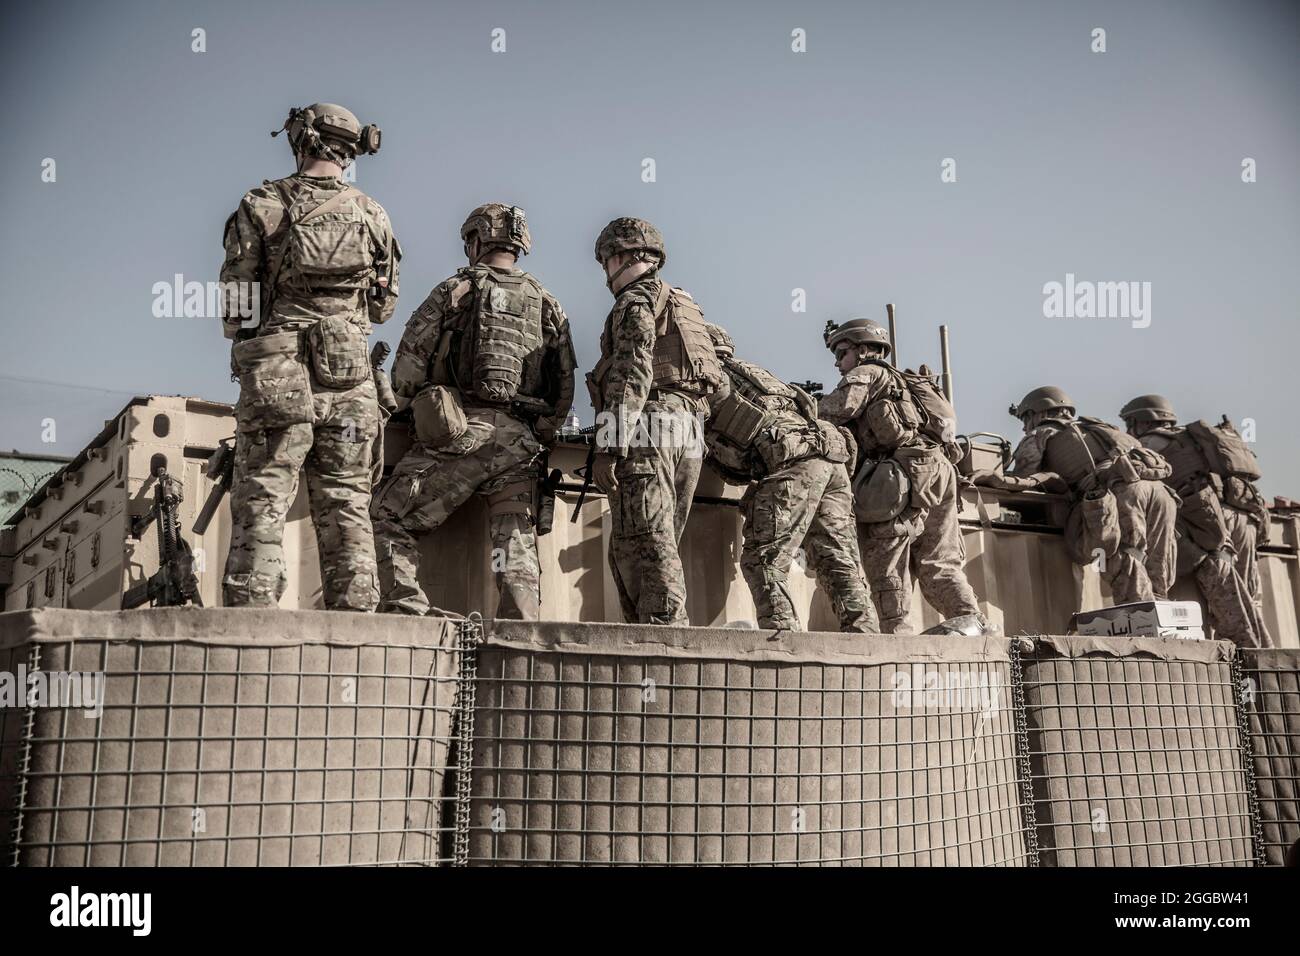 Kabul, Afghanistan. 26th Aug, 2021. U.S. Marines with the Special Purpose Marine Air-Ground Task Force Crisis Response team, keep security at the Evacuation Control Center at Hamid Karzai International Airport during Operation Allies Refuge August 26, 2021 in Kabul, Afghanistan. Credit: Planetpix/Alamy Live News Stock Photo